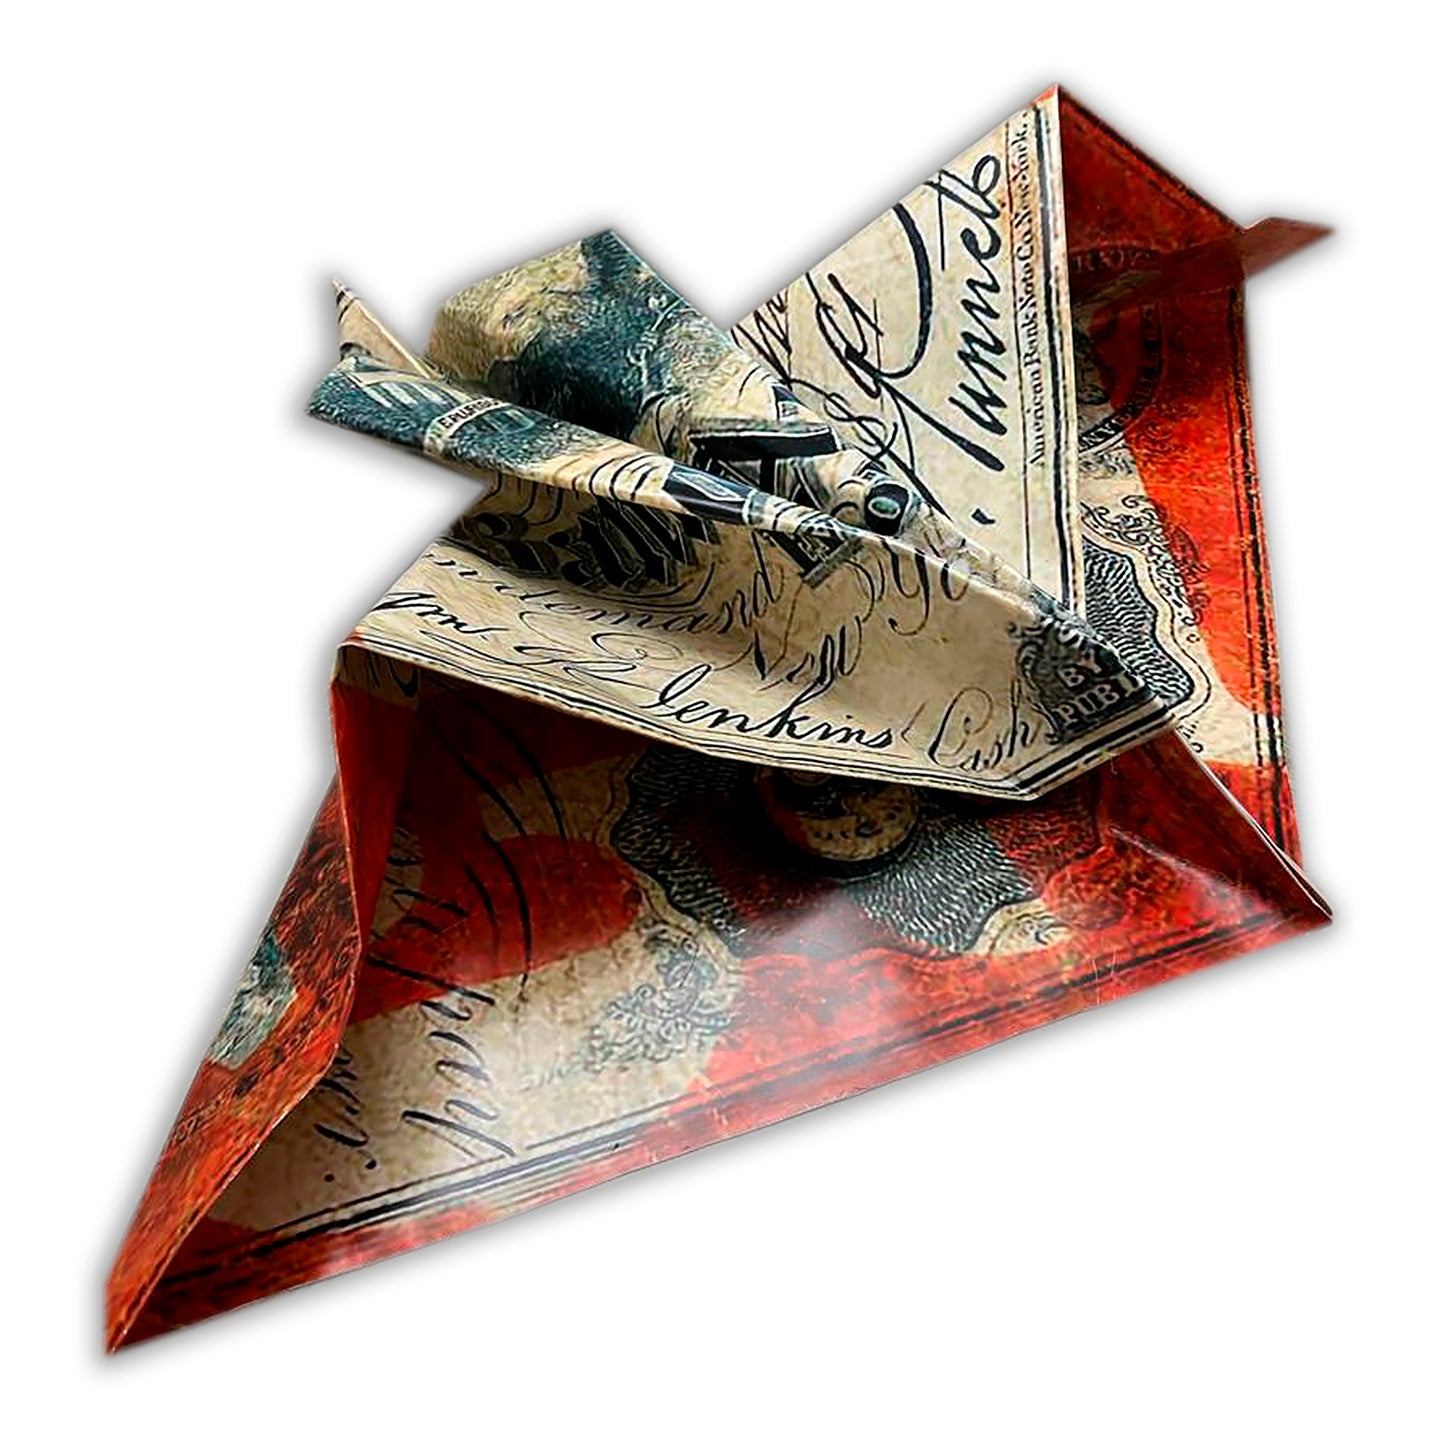 Origami, decoration, art, handmade ships in photographic paper, covered in resin